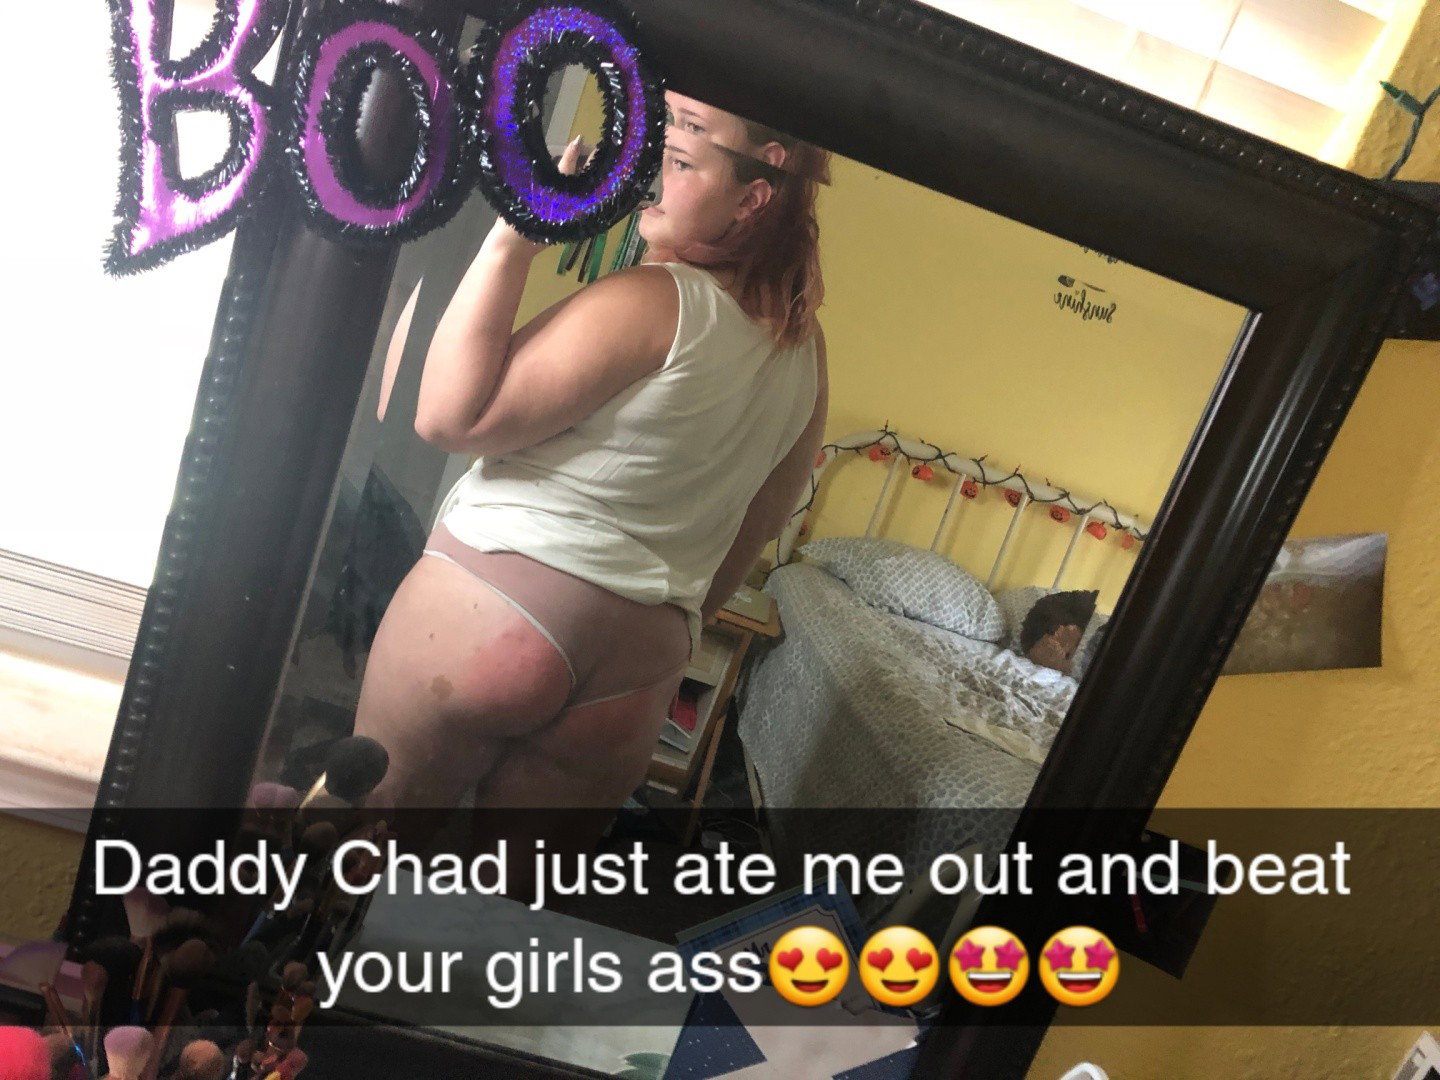 Watch the Photo by Cjames2578 with the username @Cjames2578, posted on May 21, 2019. The post is about the topic Hotwife/Cuckold Snapchat. and the text says 'Got these while at work from my gf.'